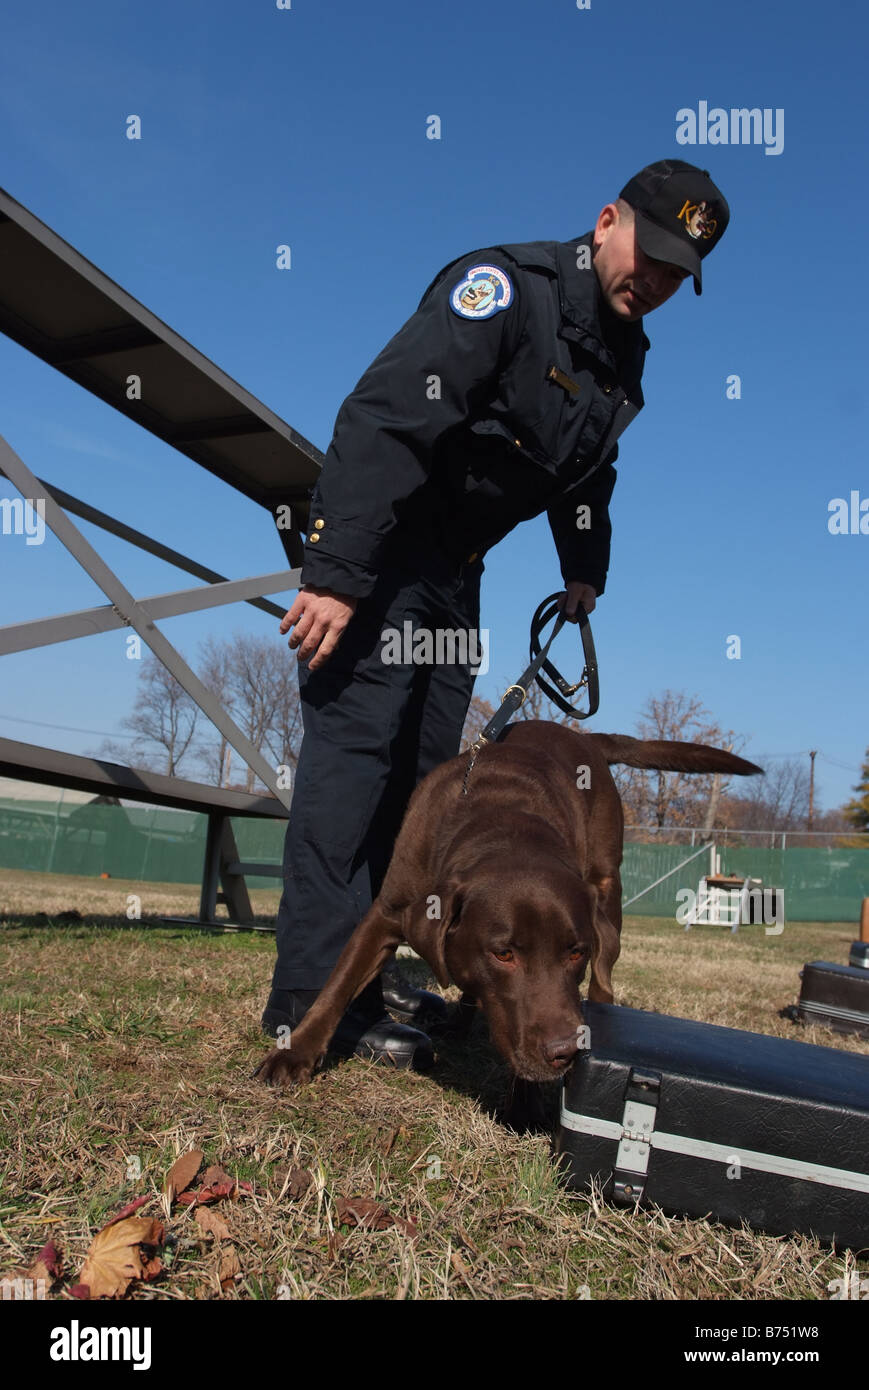 Bomb_sniffing_dog_is_being_trained_in_Wa